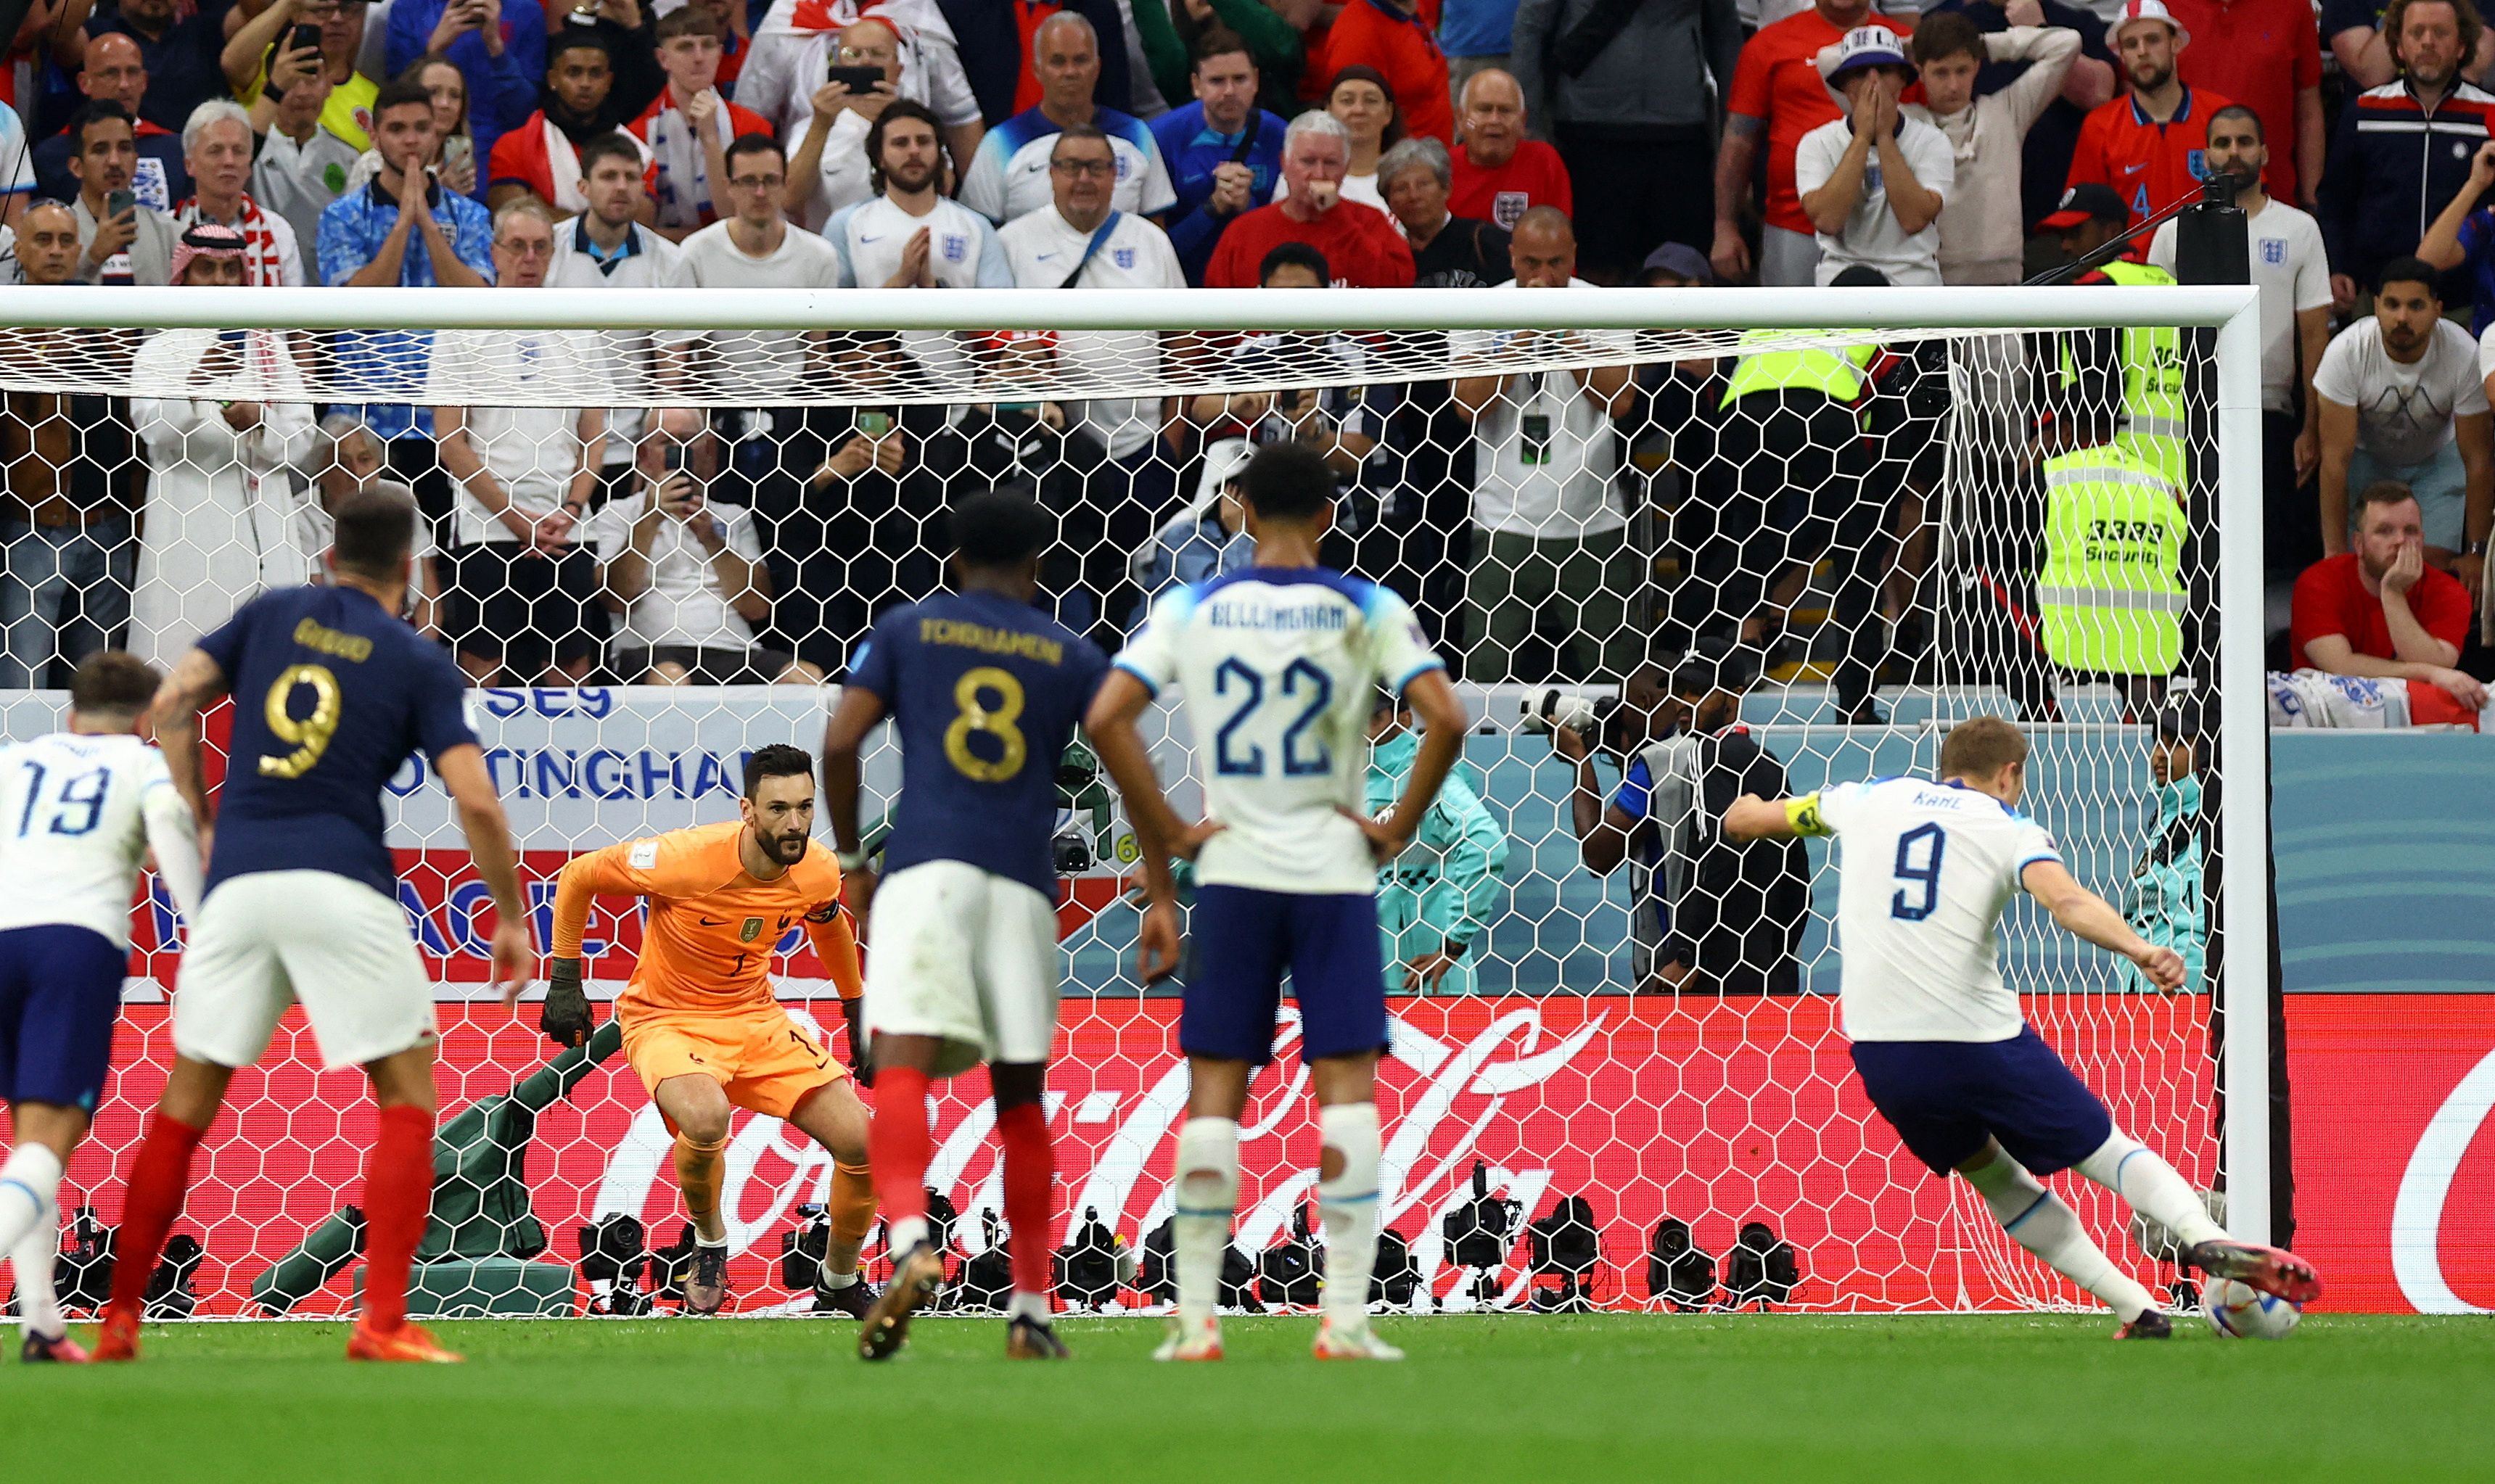 England's Harry Kane misses from the penalty spot.